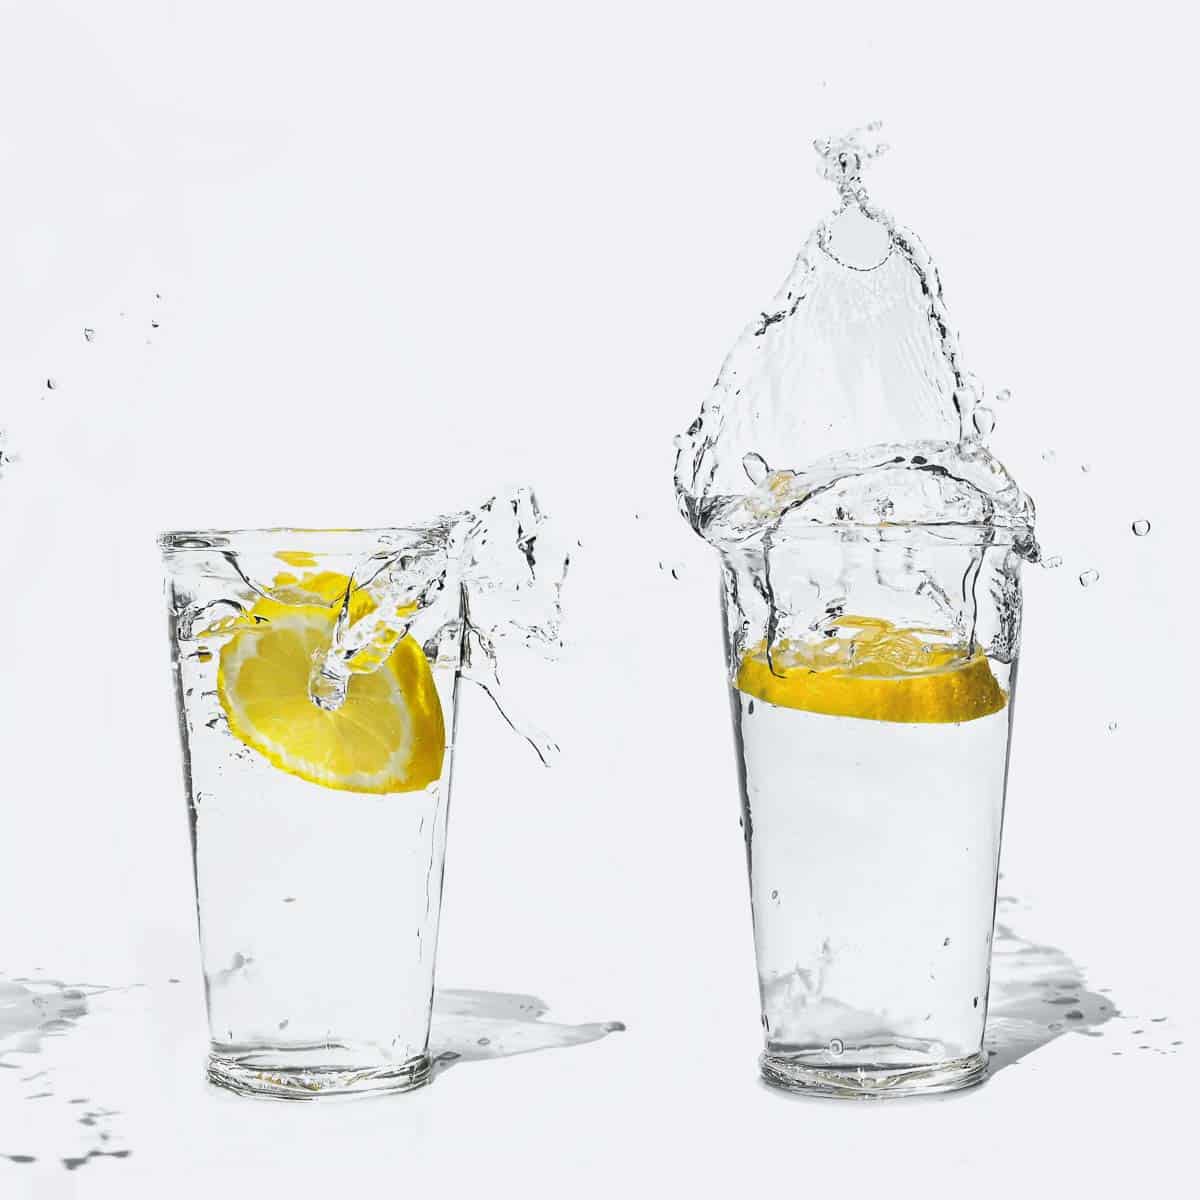 Splashes of water with lemon.